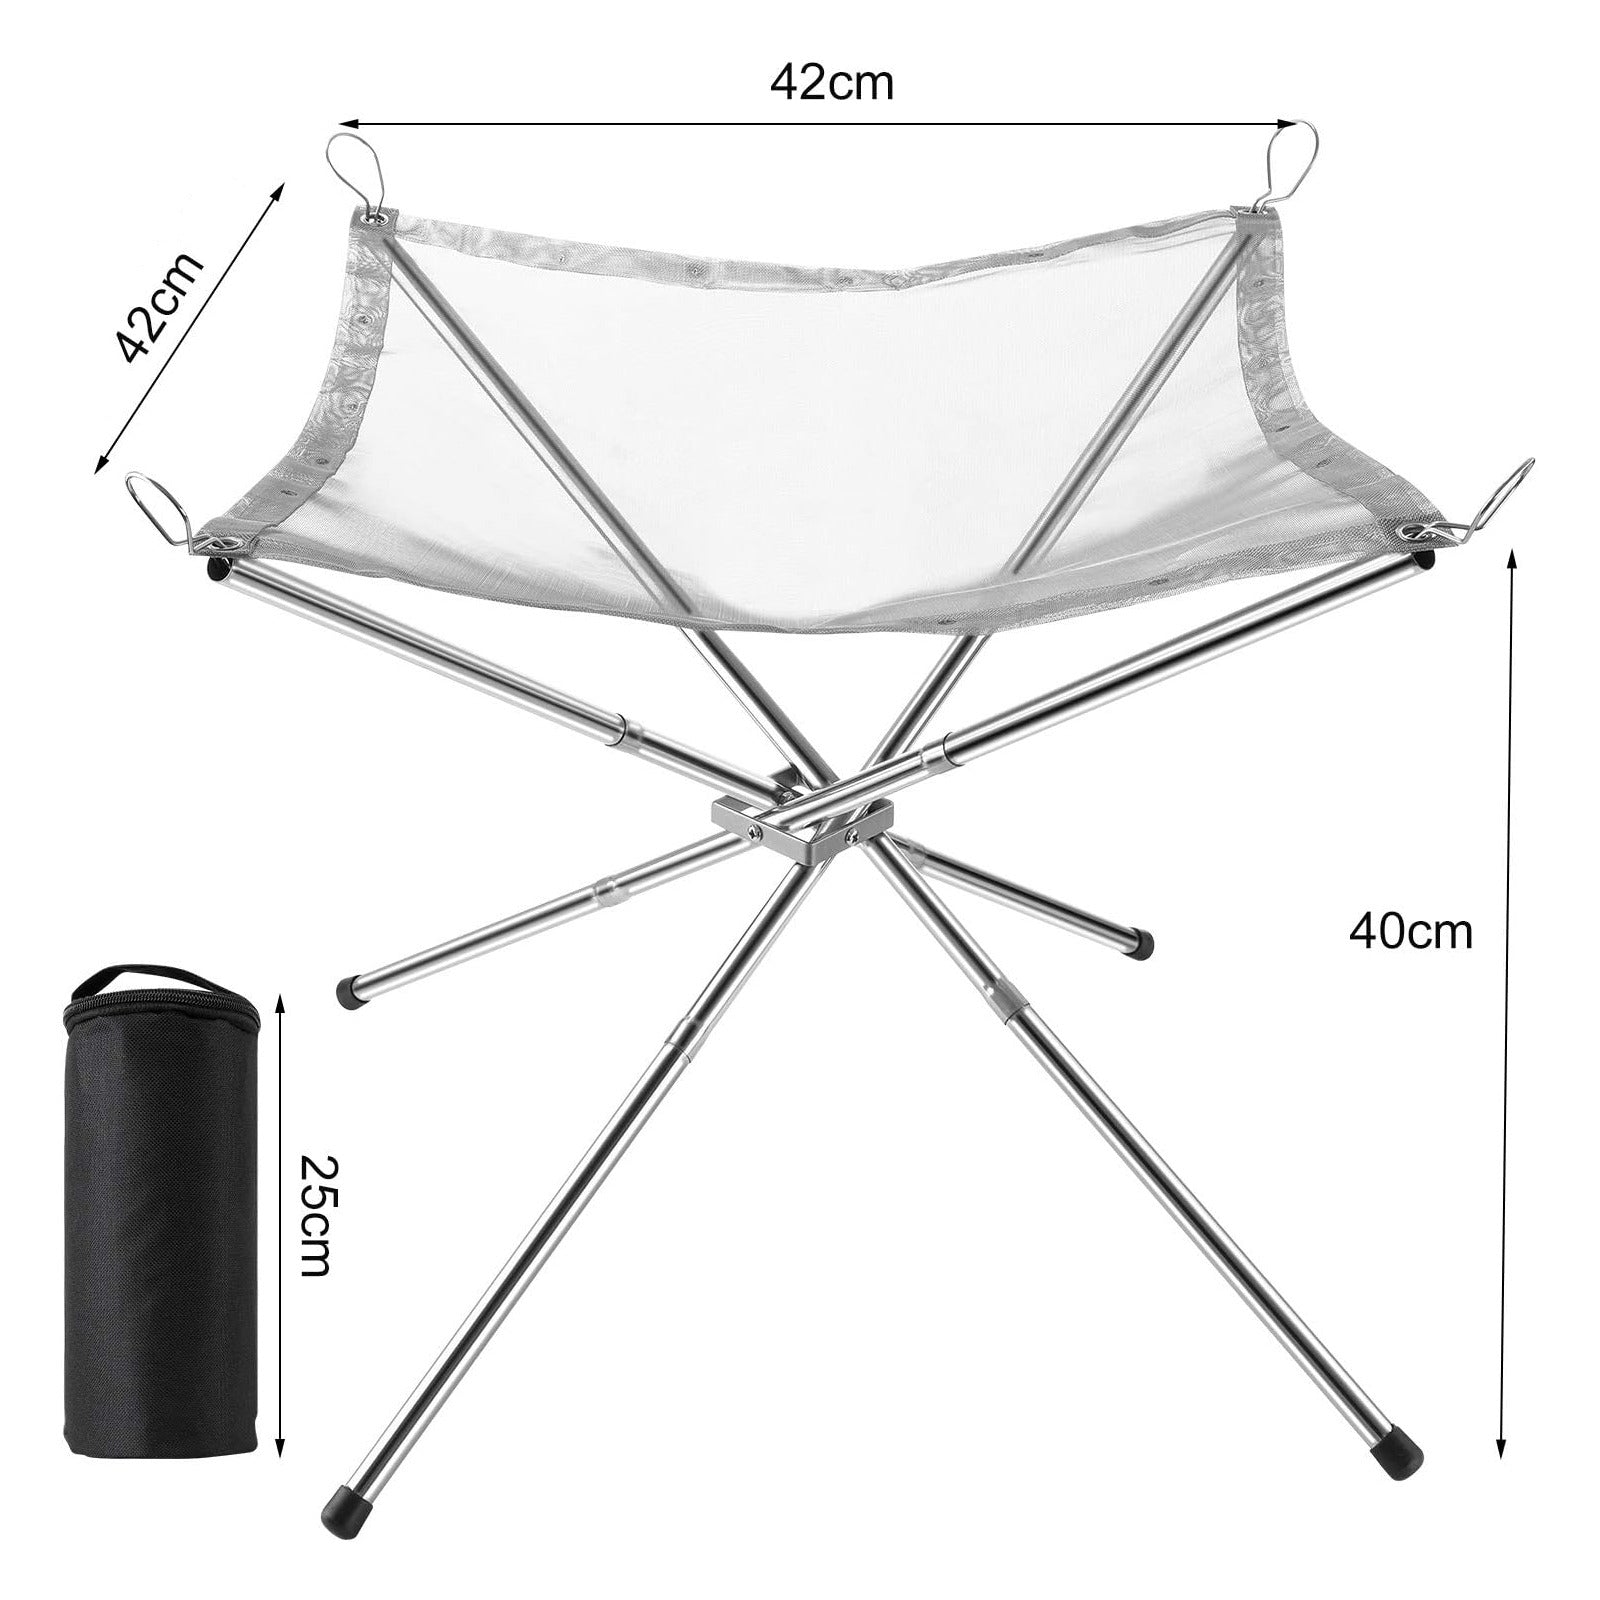 Sizes of Folding Camping Fire Stand Rack.